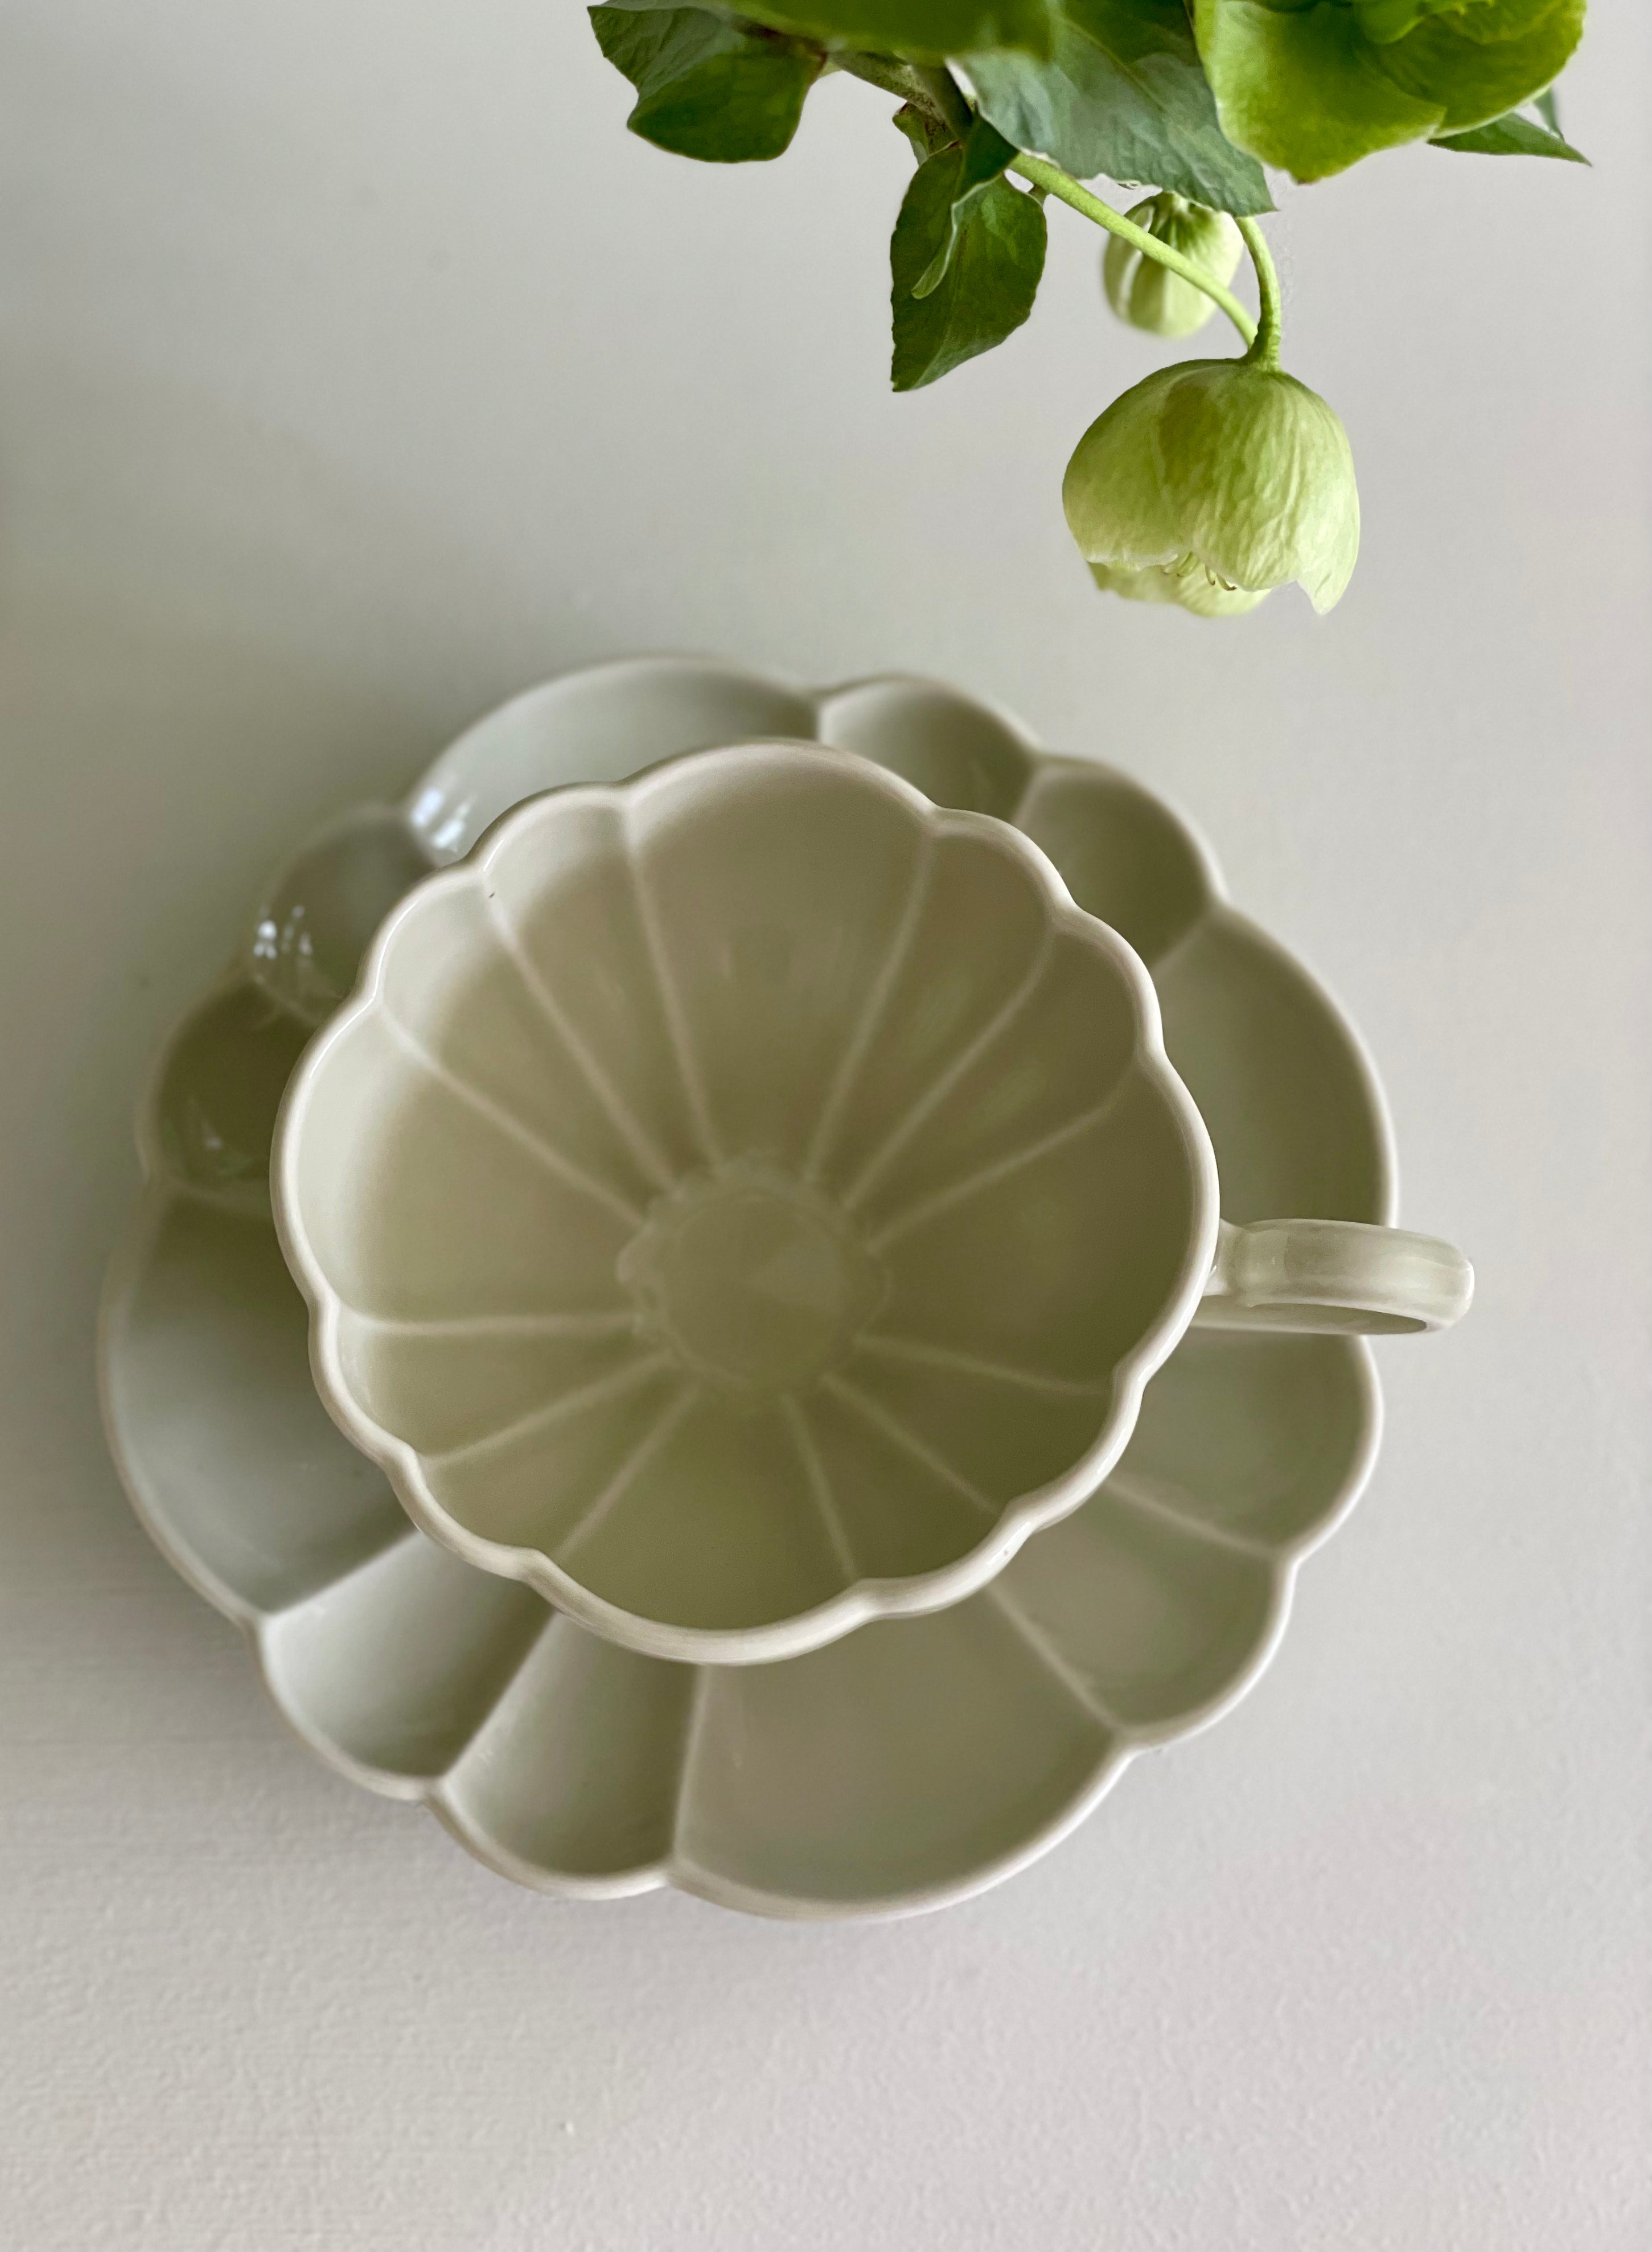 Flower cup with saucer; light green